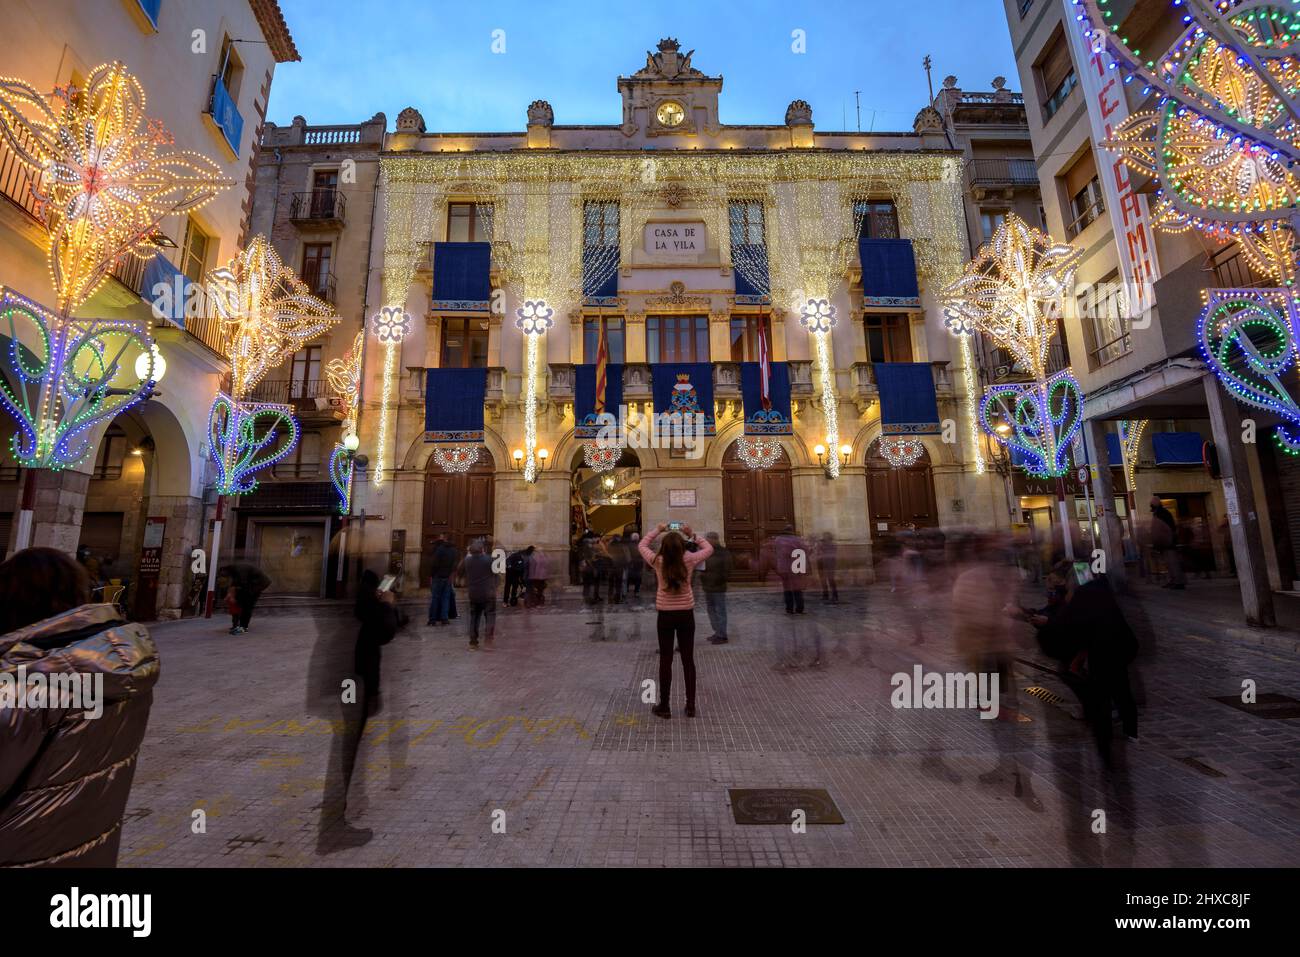 Blat Square illuminated during the 2022 (2021+1) Valls Decennial Festival, in honor of the Virgin of the Candlemas in Valls, Tarragona Catalonia Spain Stock Photo